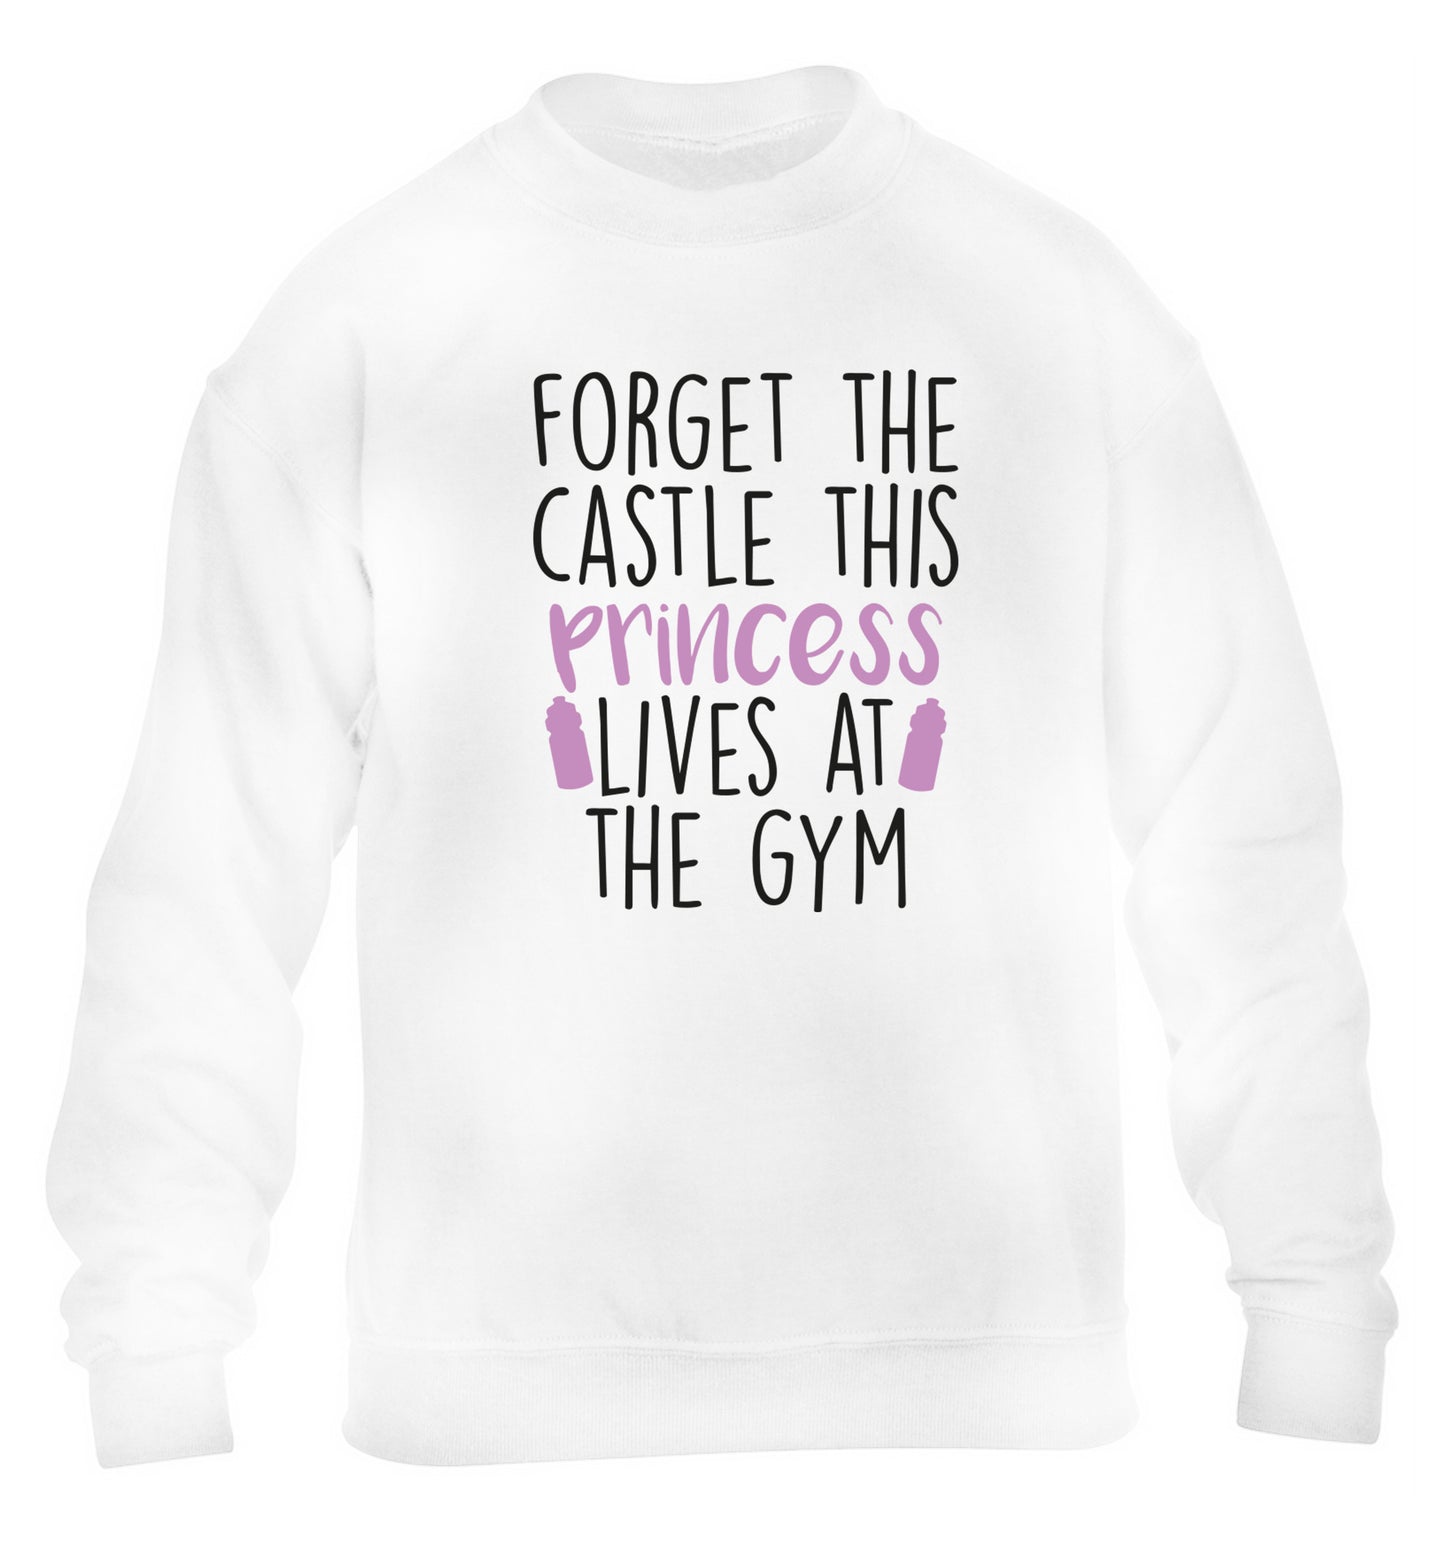 Forget the castle this princess lives at the gym children's white sweater 12-14 Years